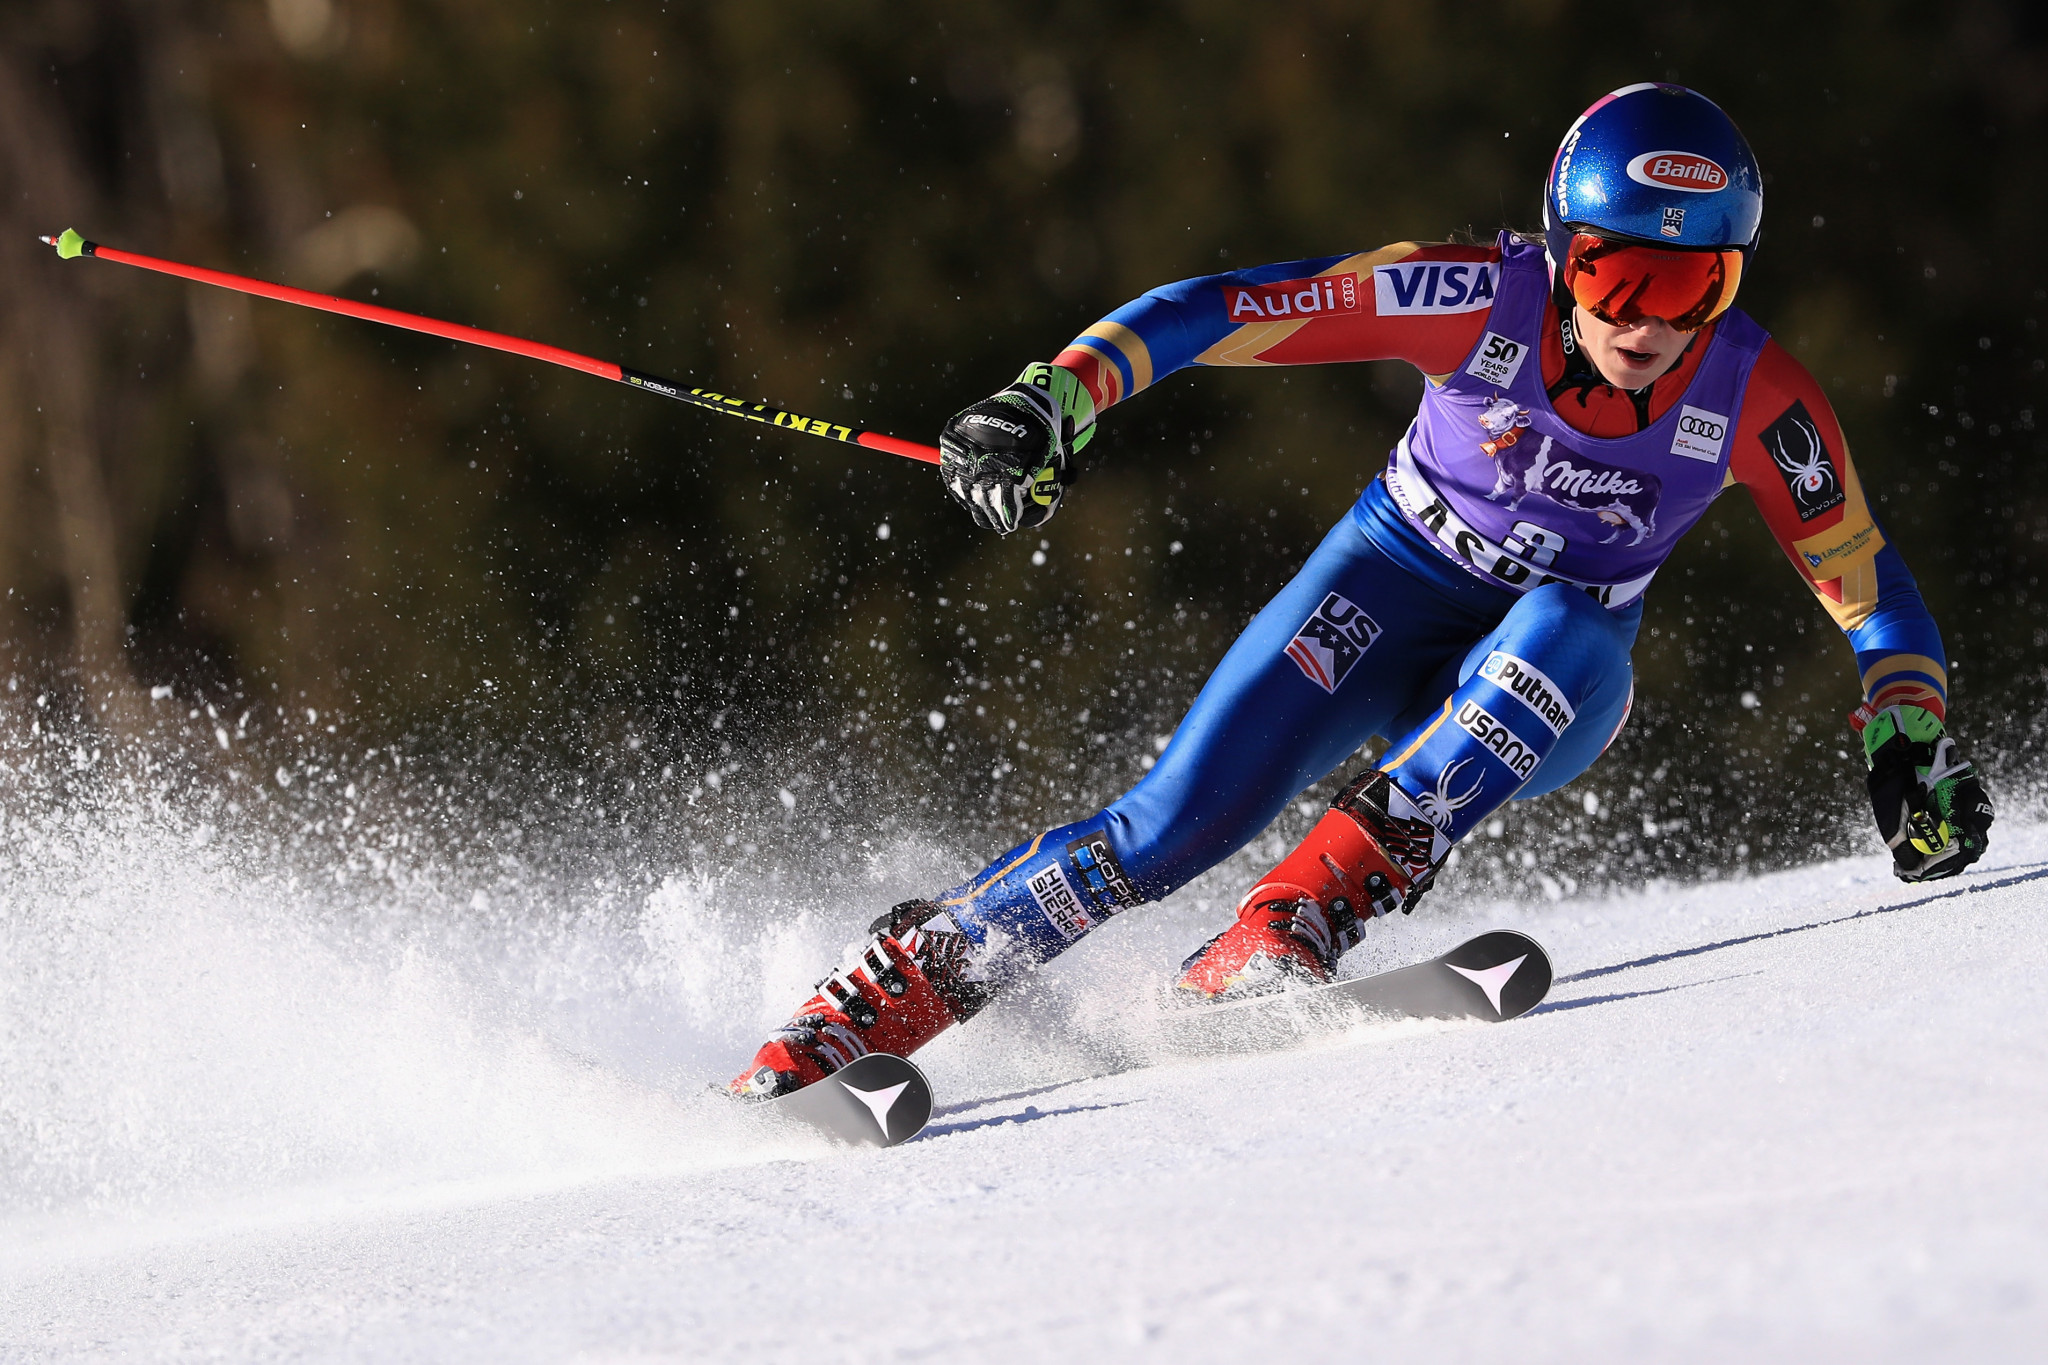 American skiers and snowboarders will also receive continuing support from USANA ©Getty Images